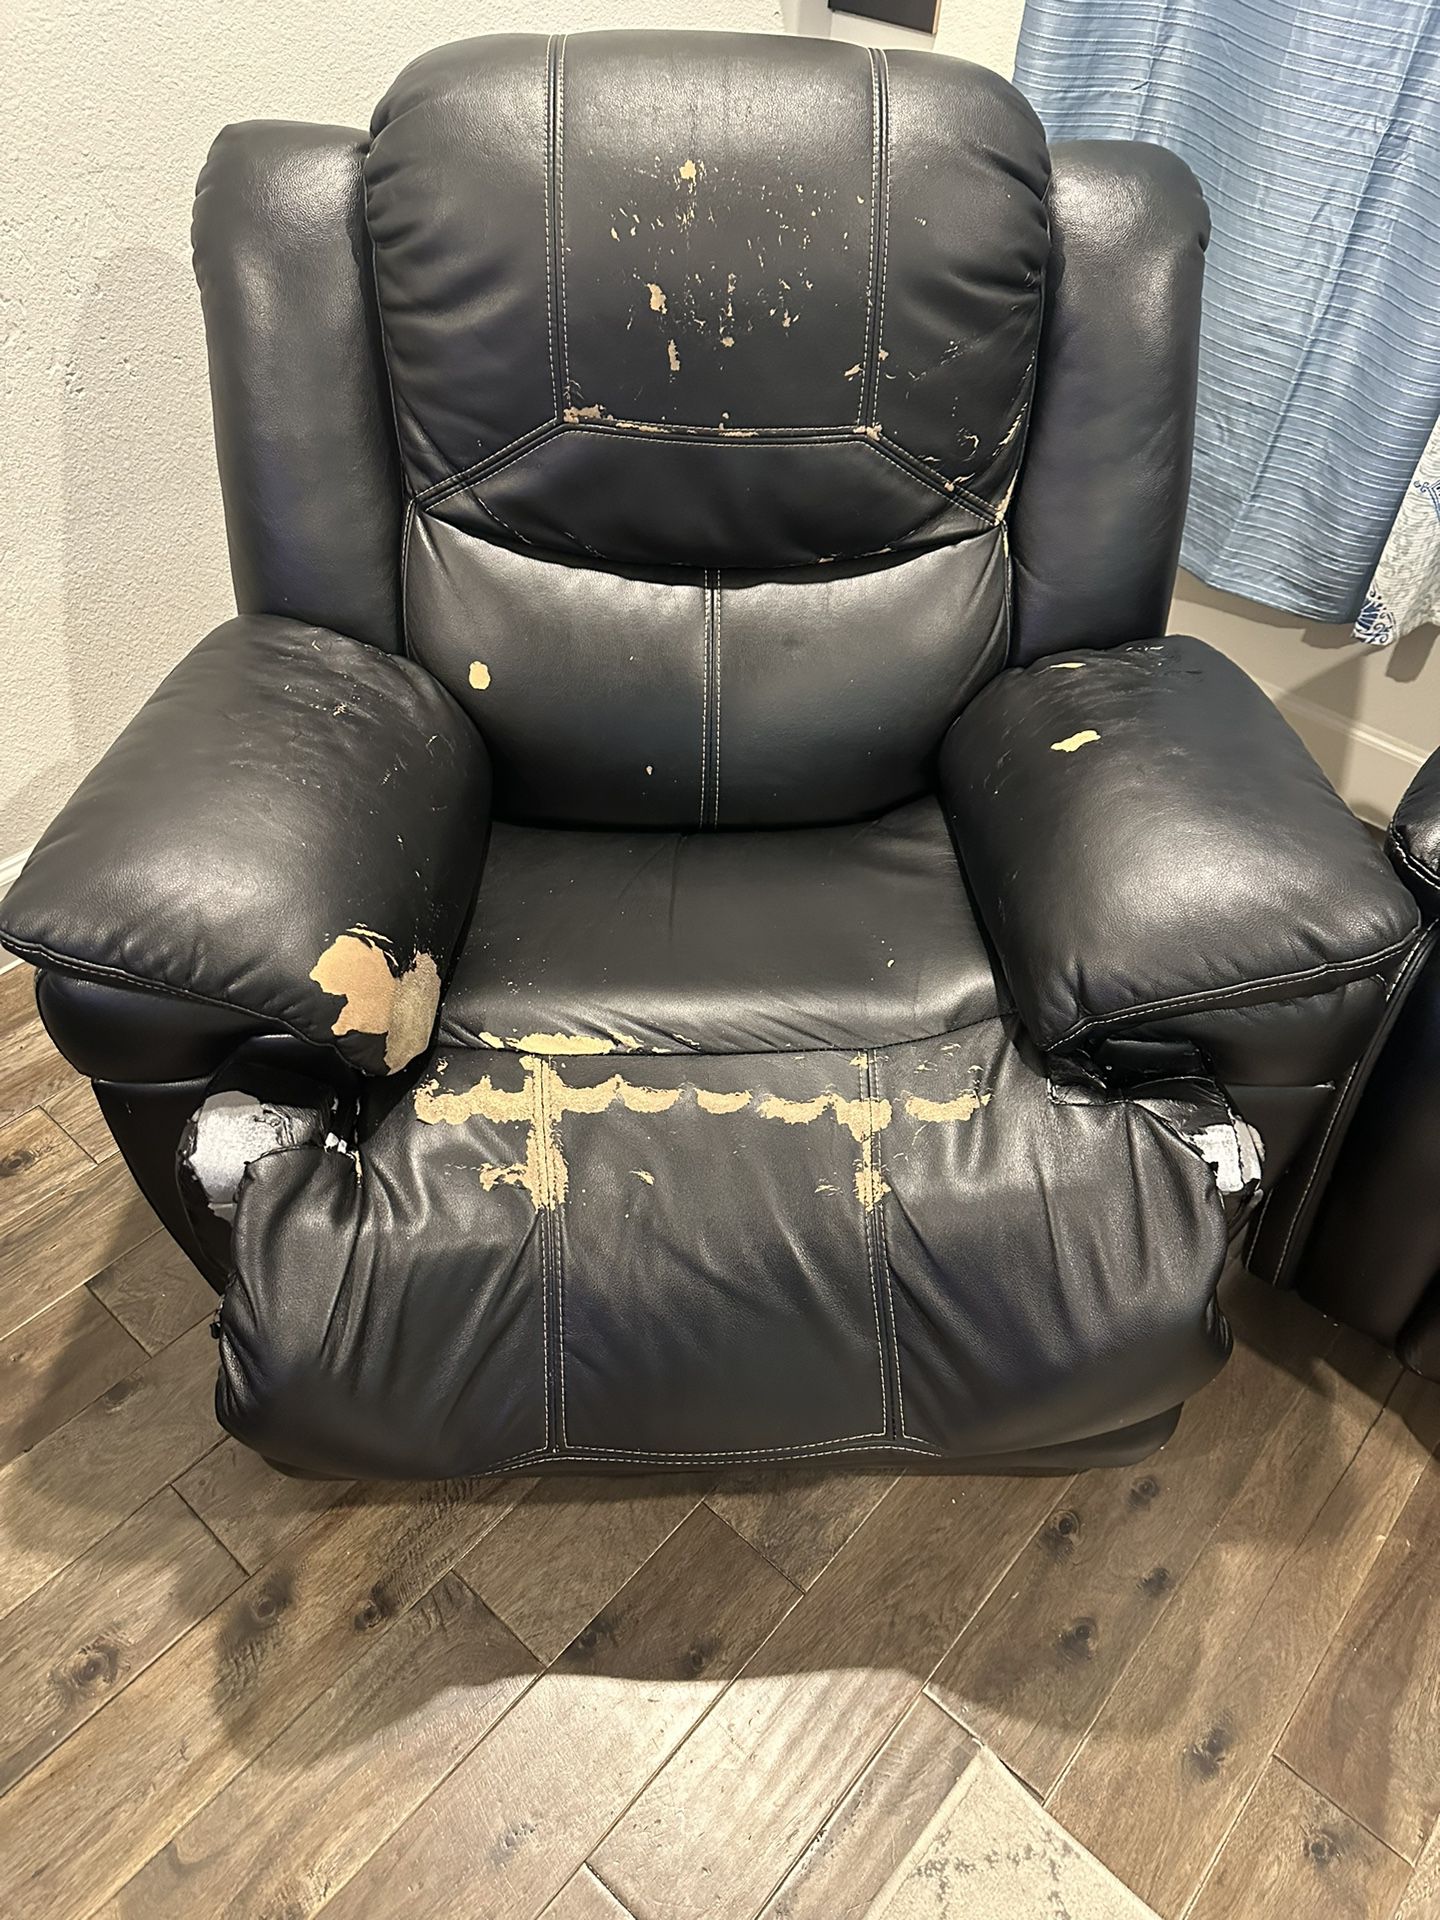 Power Recliner Moving Sale!!!!